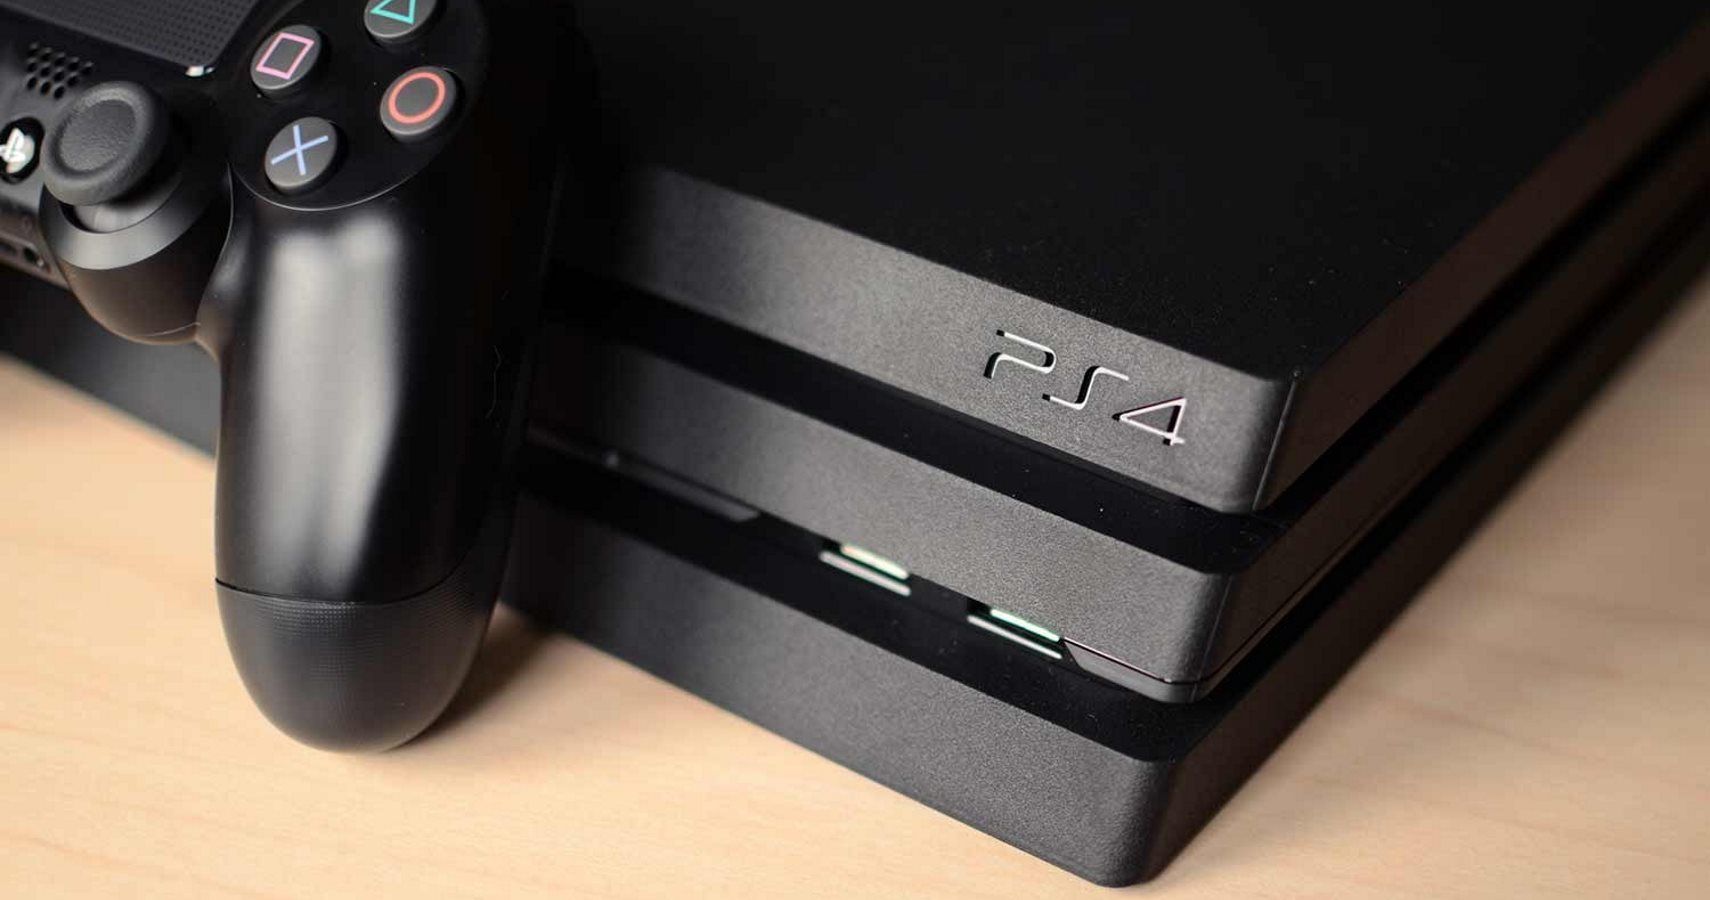 PS4 Message Hack Allegedly Bricks Console, You Can Make Sure It Doesn't Happen